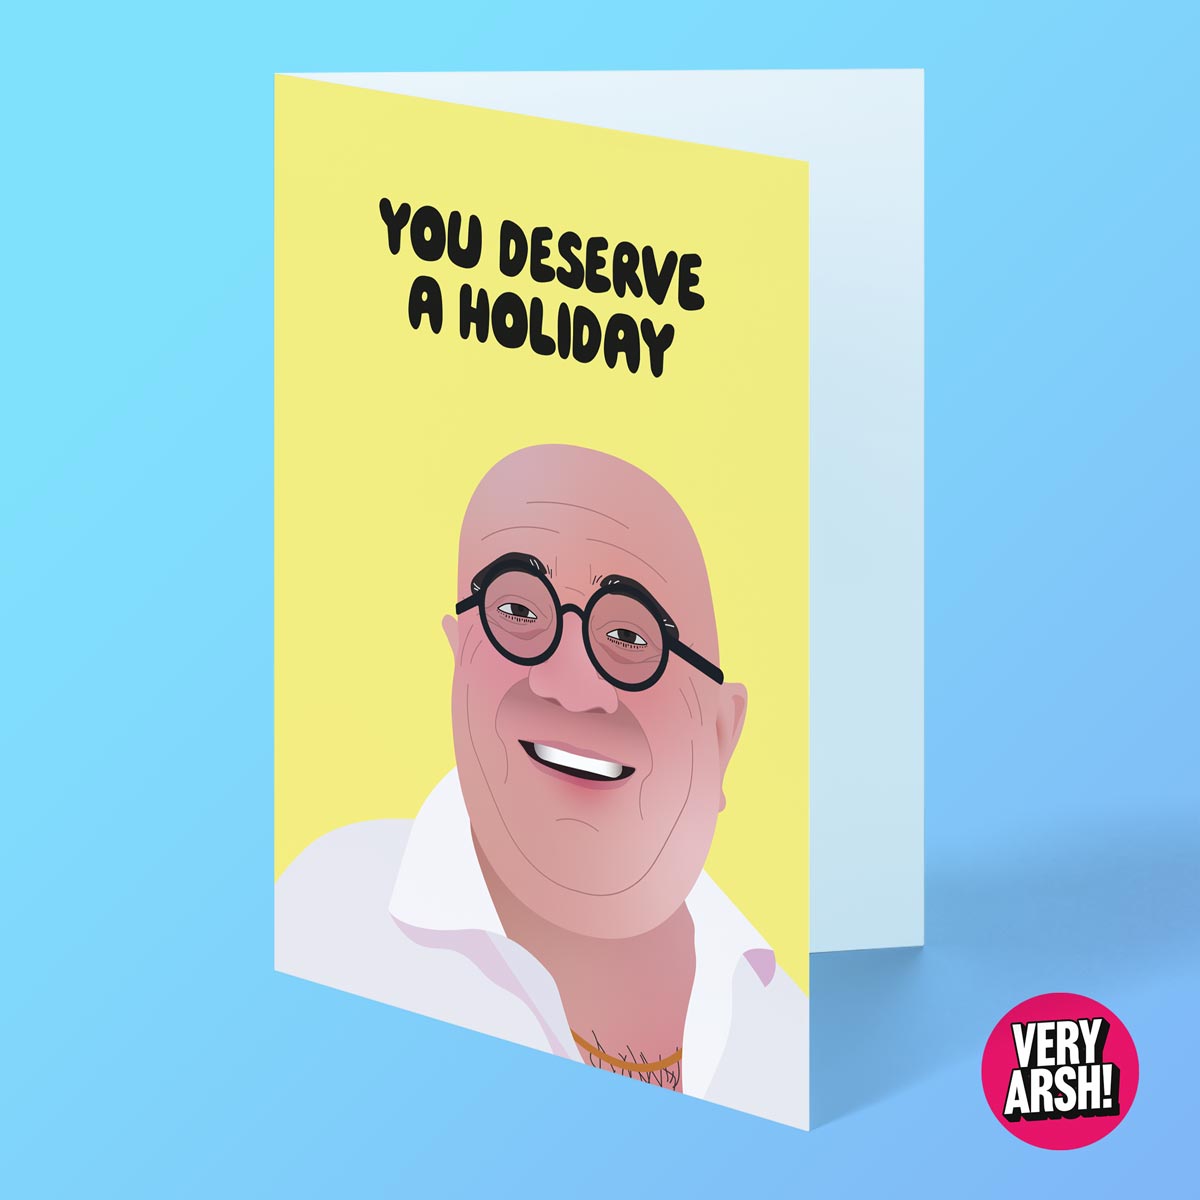 You Deserve A Holiday - Brendan's Coach Trip inspired Greeting Card